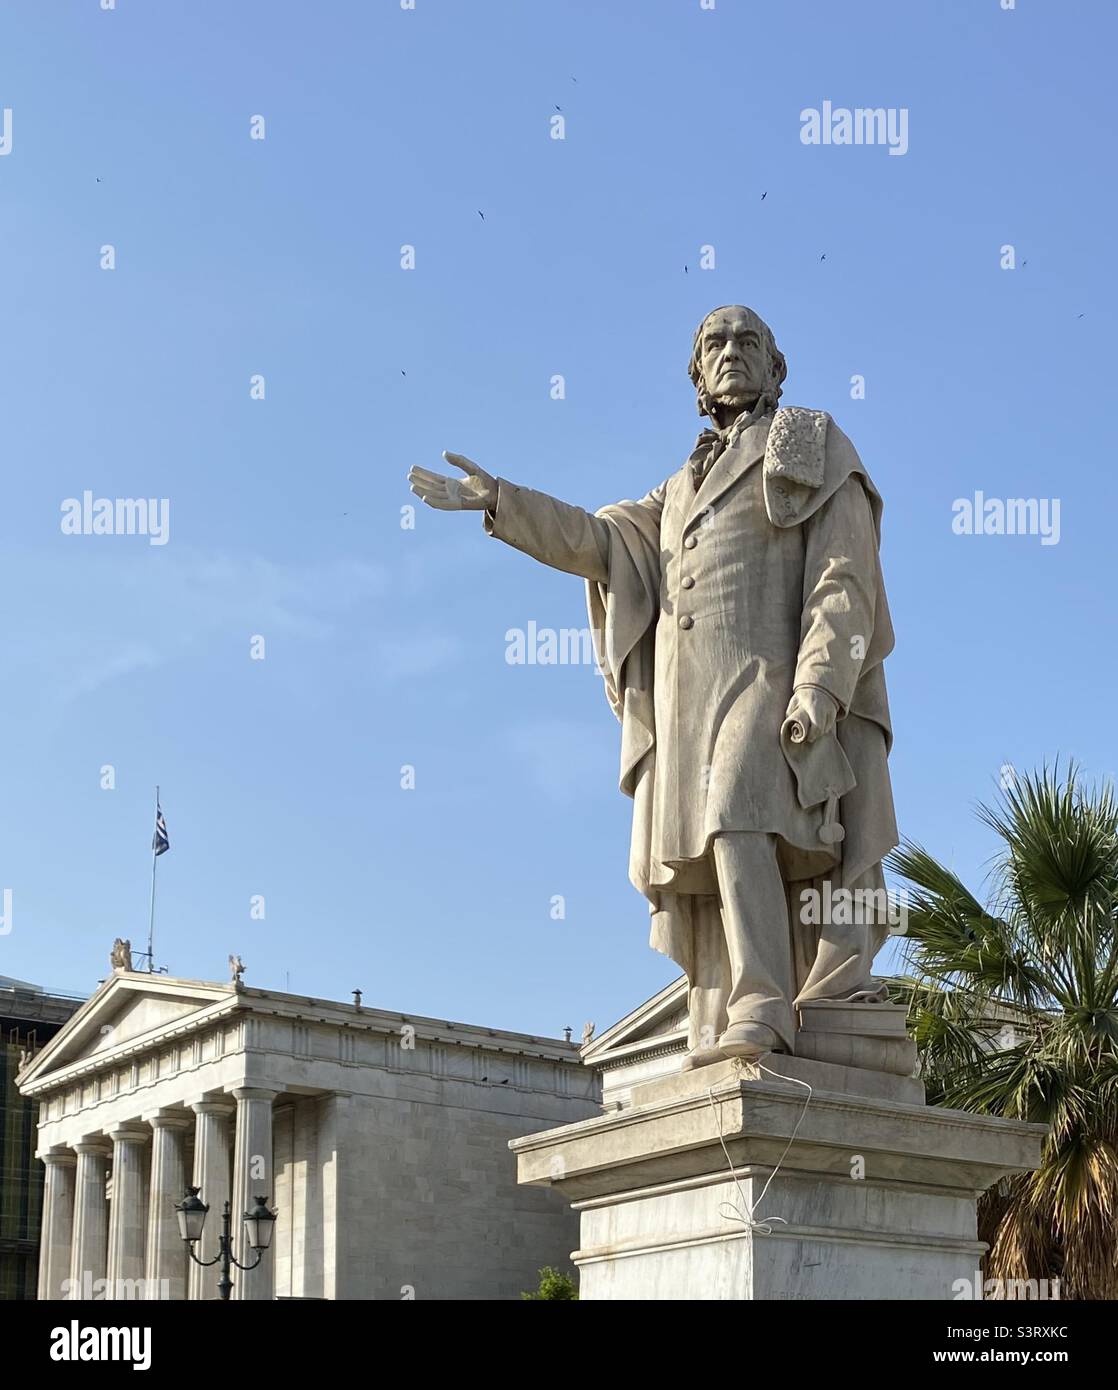 Statue of the British Prime Minister W E Gladstone (1809-98) by Vitalis, before the old National University of Athens building, Greece. He was a classical scholar who wrote a 500 page book on Homer. Stock Photo